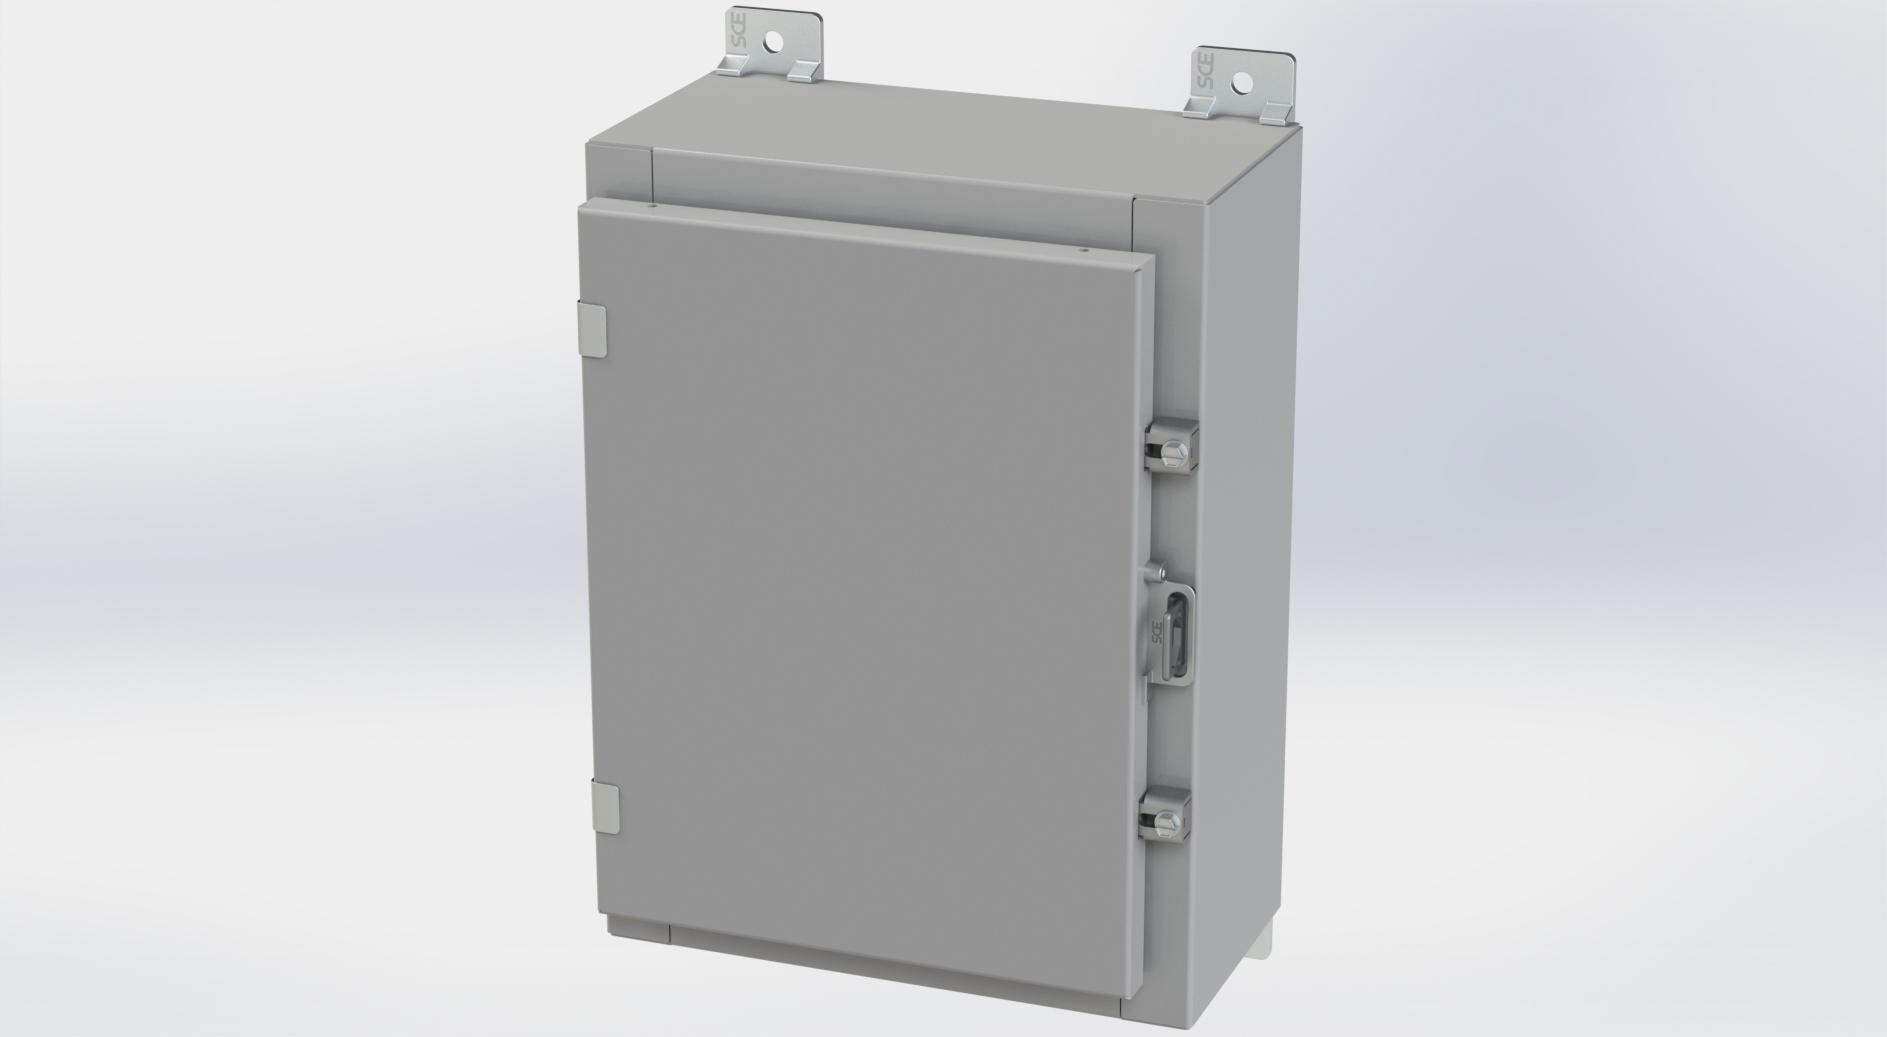 Saginaw Control SCE-16H1206LP Nema 4 LP Enclosure, Height:16.00", Width:12.00", Depth:6.00", ANSI-61 gray powder coating inside and out. Optional panels are powder coated white.